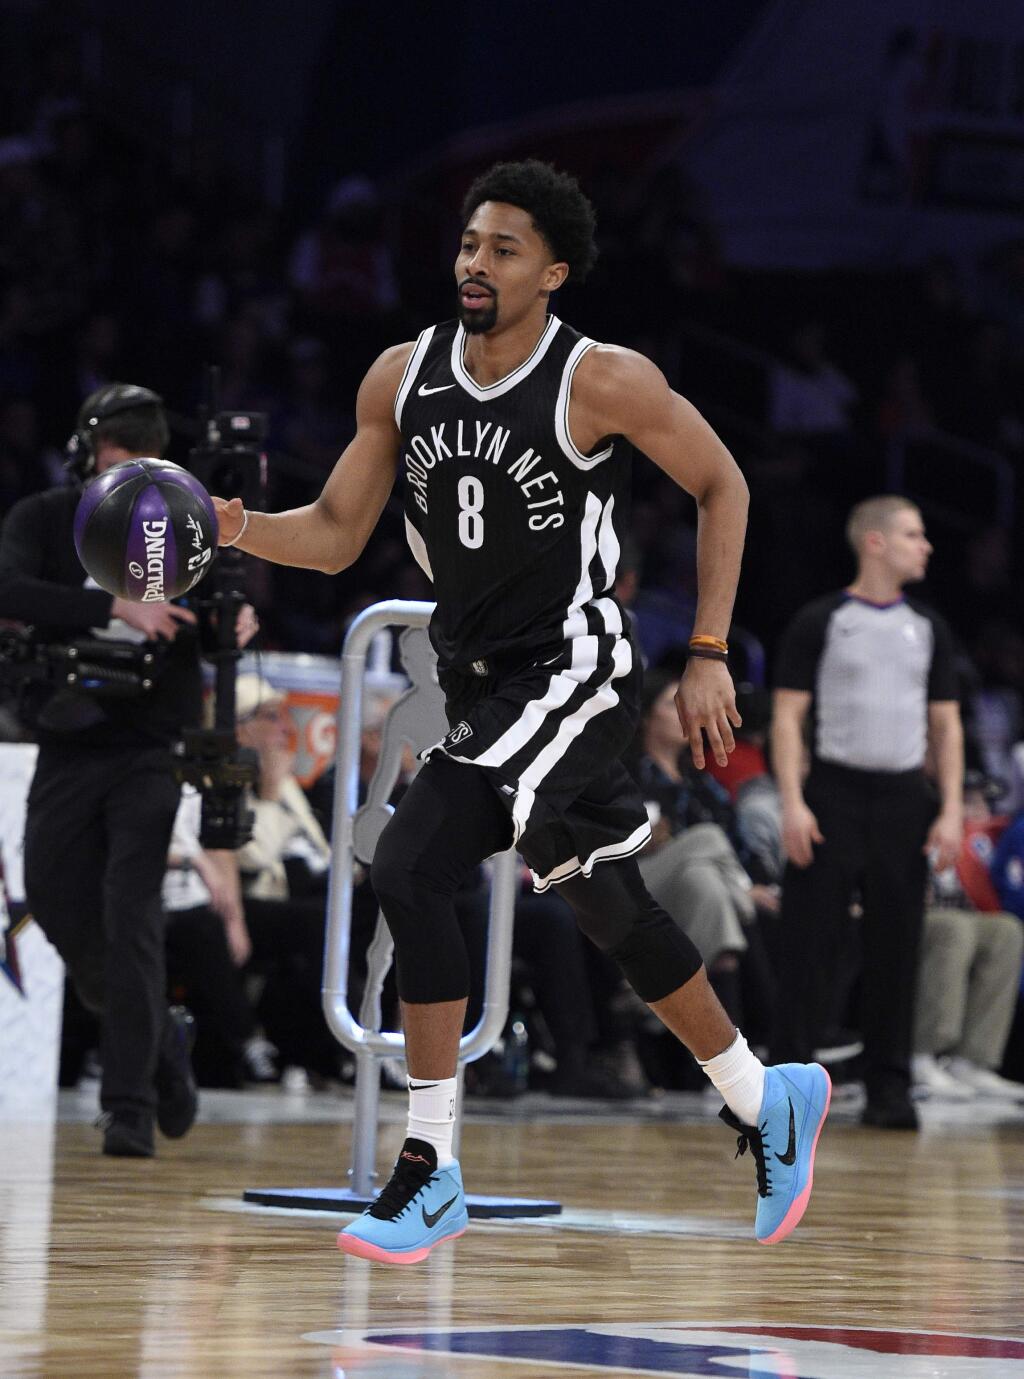 Brooklyn Nets' Spencer Dinwiddie dribbles during the NBA All-Star basketball Skills Challenge, Saturday, Feb. 17, 2018, in Los Angeles. Dinwiddie won the event. (AP Photo/Chris Pizzello)